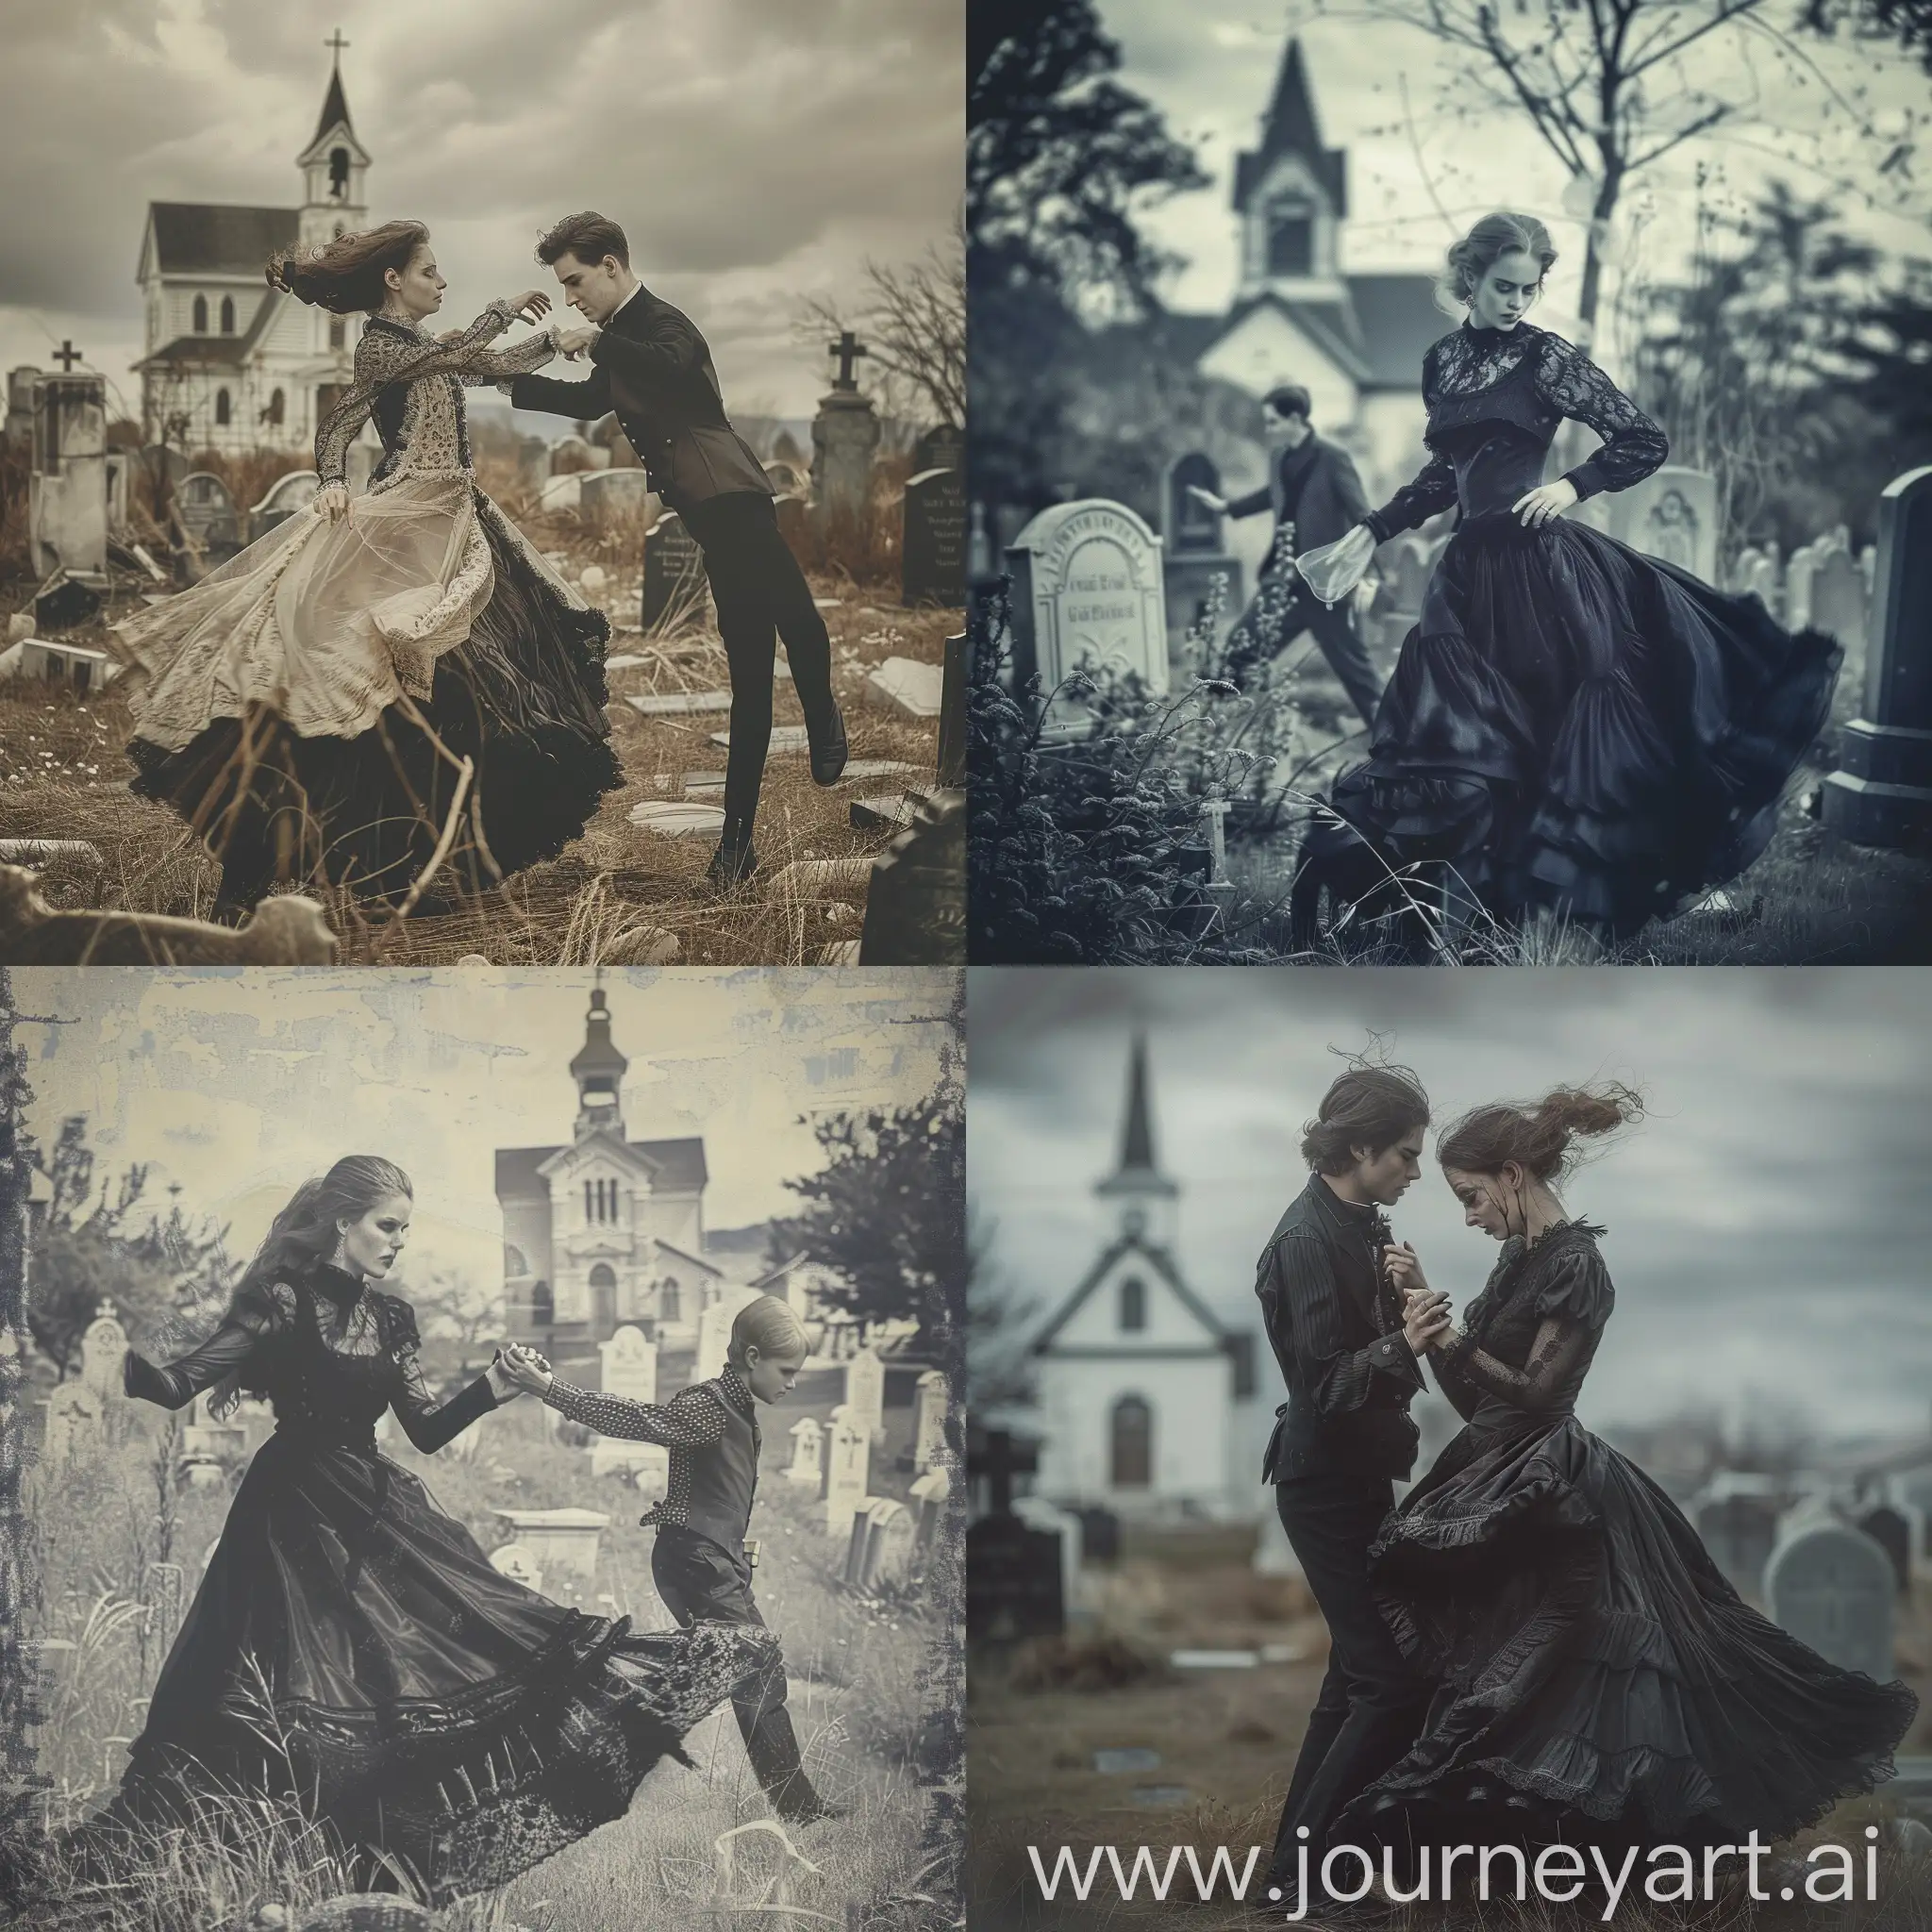 Ethereal-Victorian-Dance-in-Haunted-Cemetery